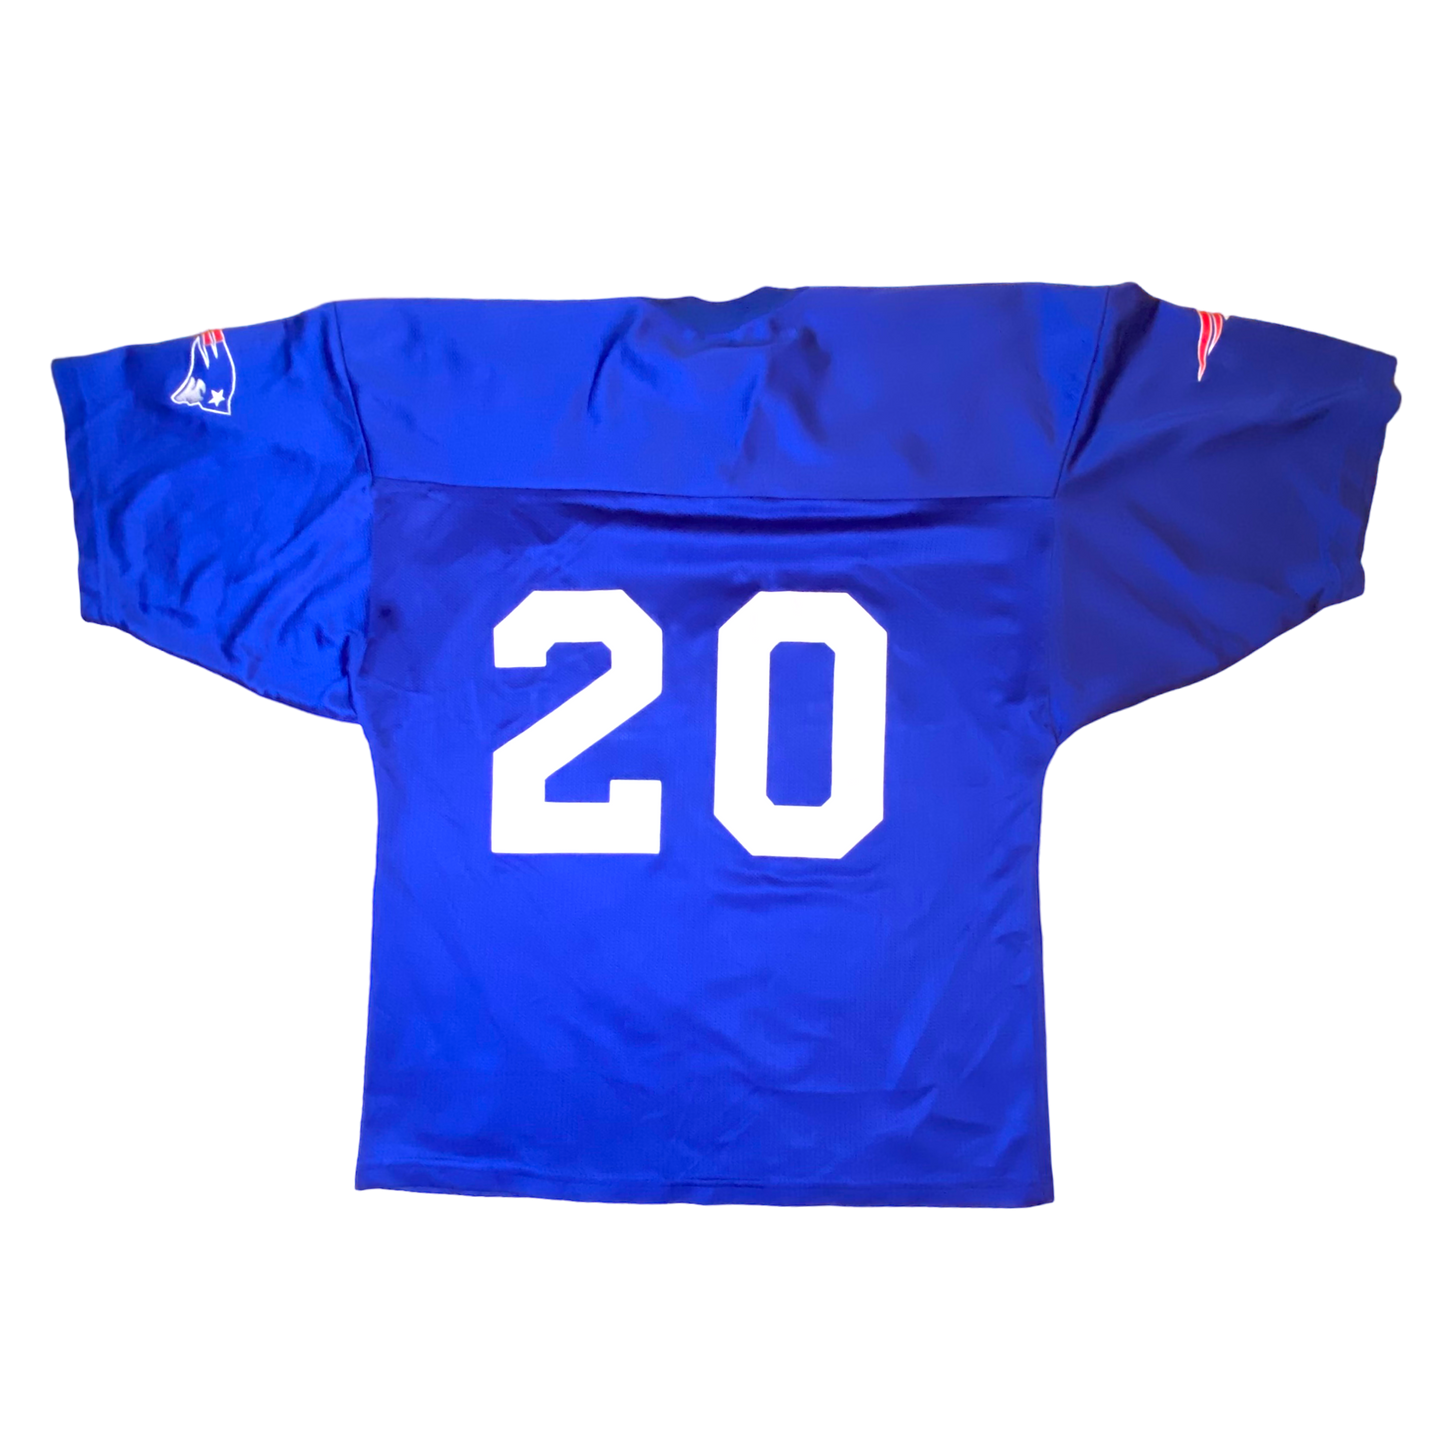 Majestic - Patriots Play Football Vintage 90s Blue Youth Jersey